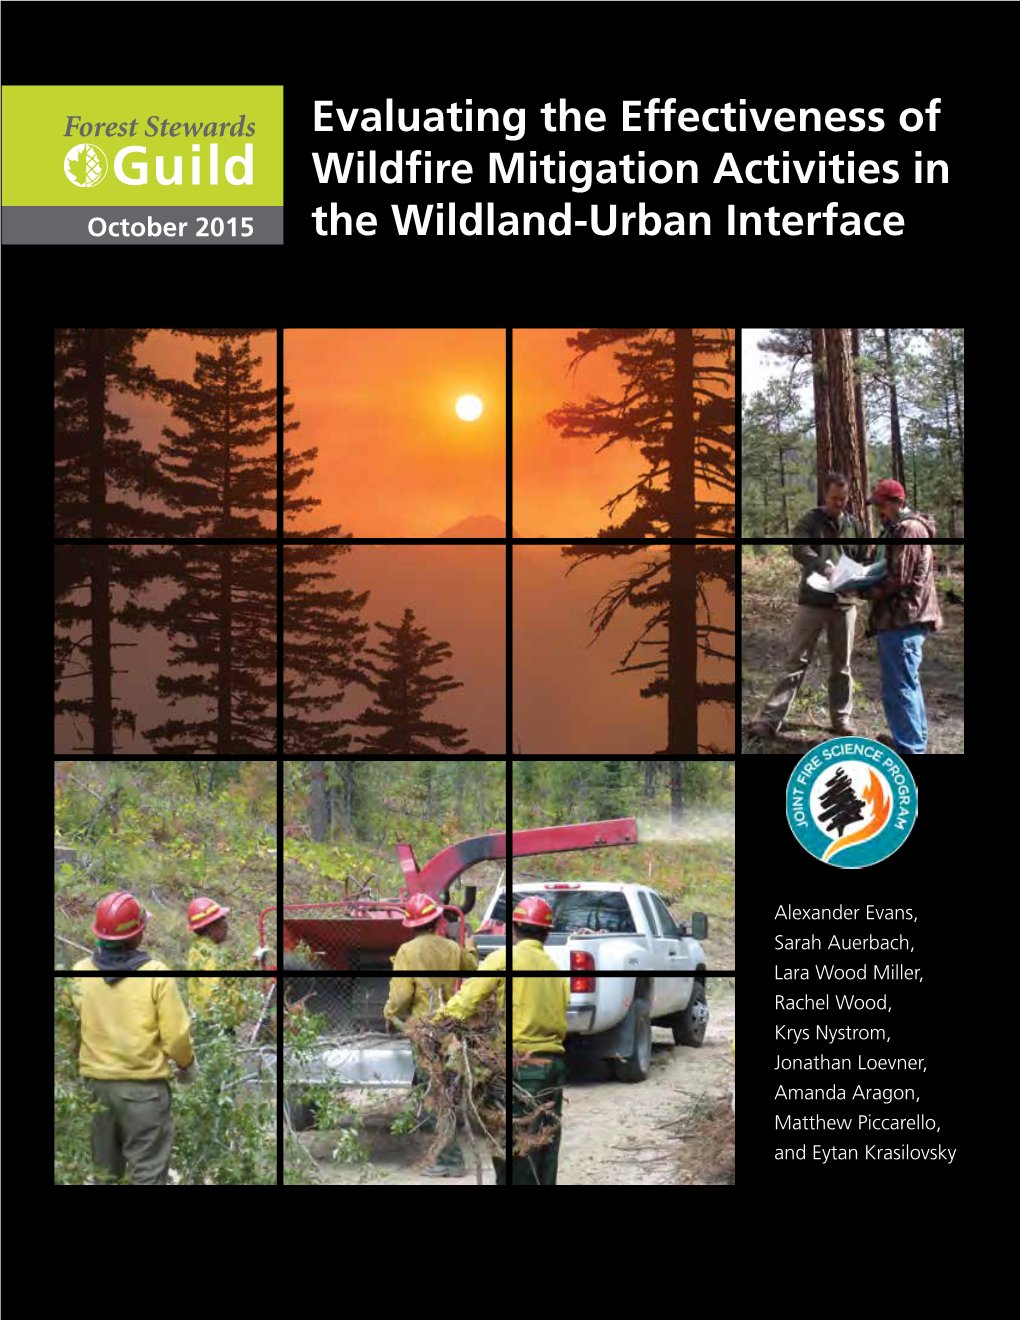 Evaluating the Effectiveness of Wildfire Mitigation Activities in the Wildland-Urban Interface